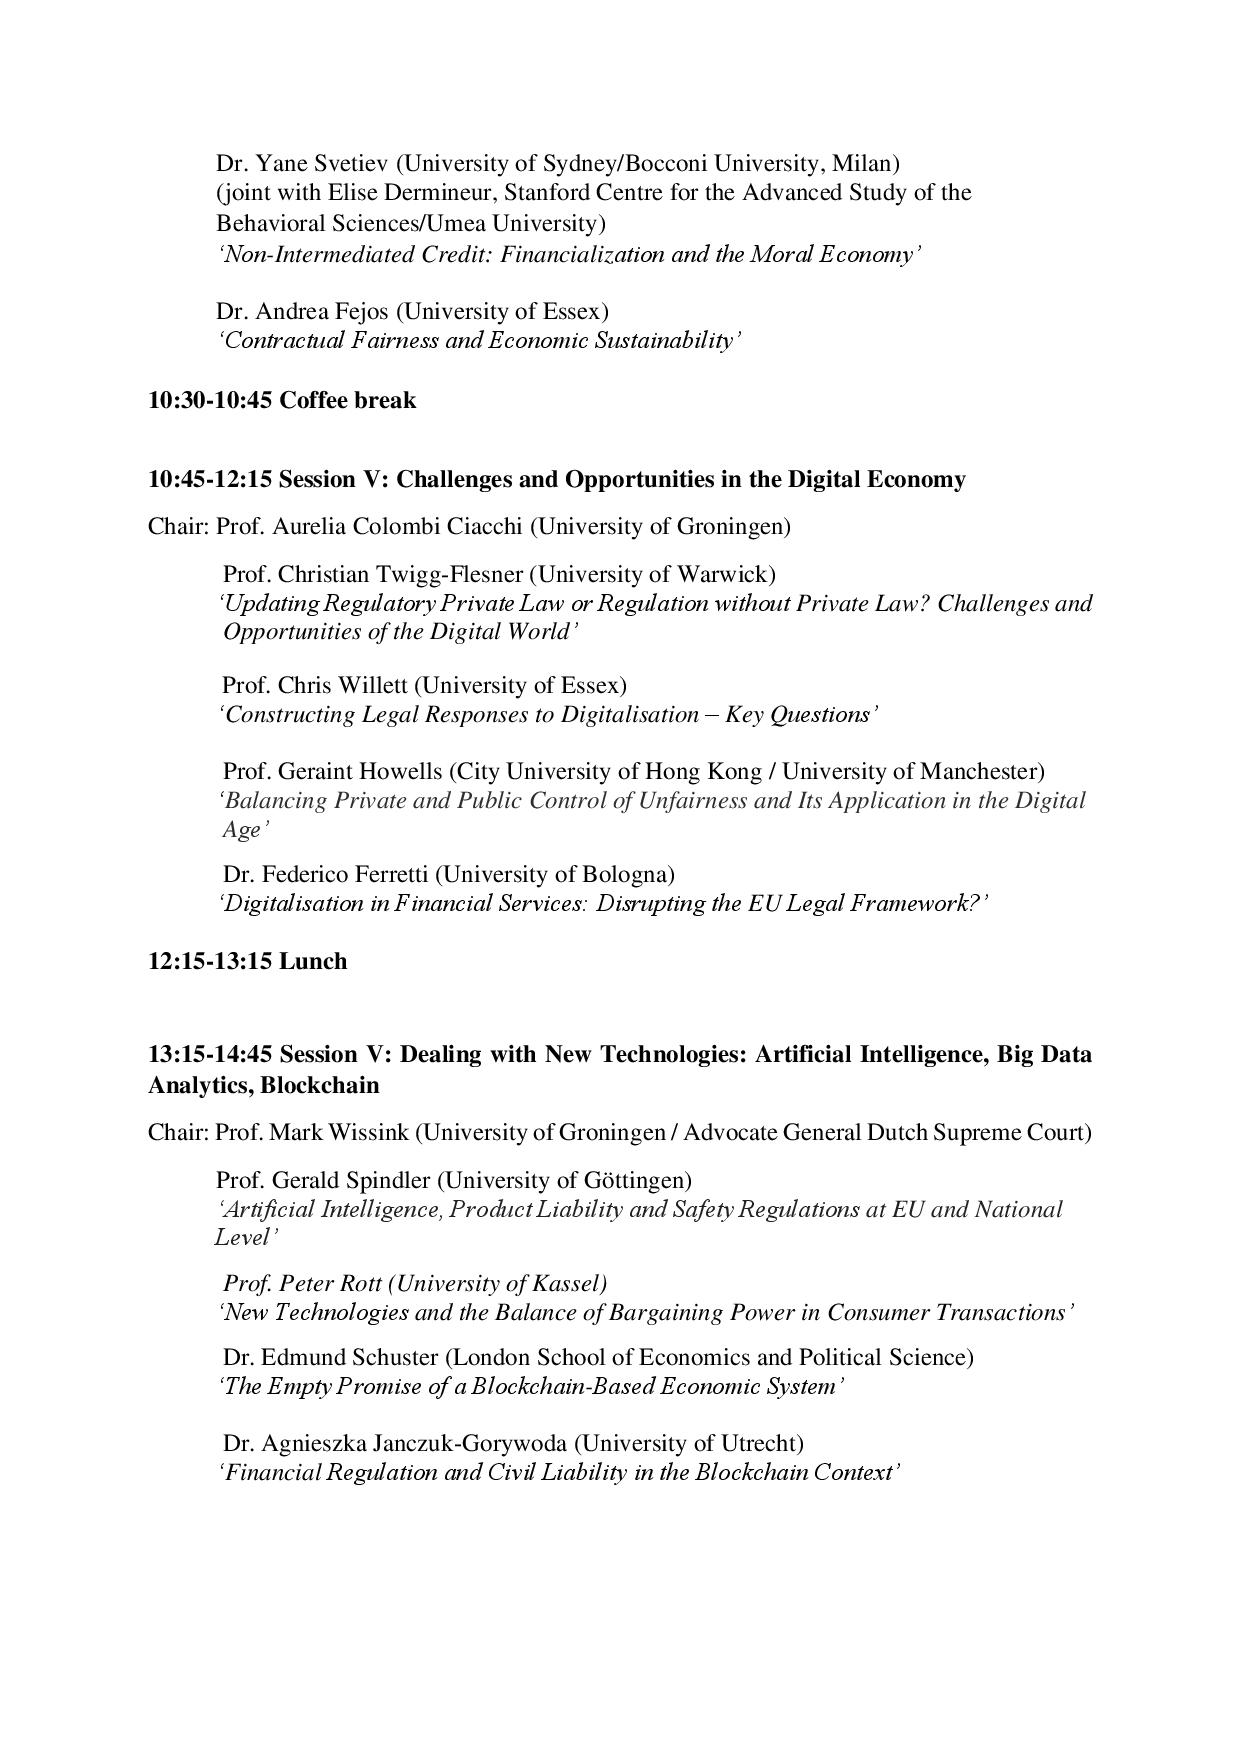 Conference programme page 3